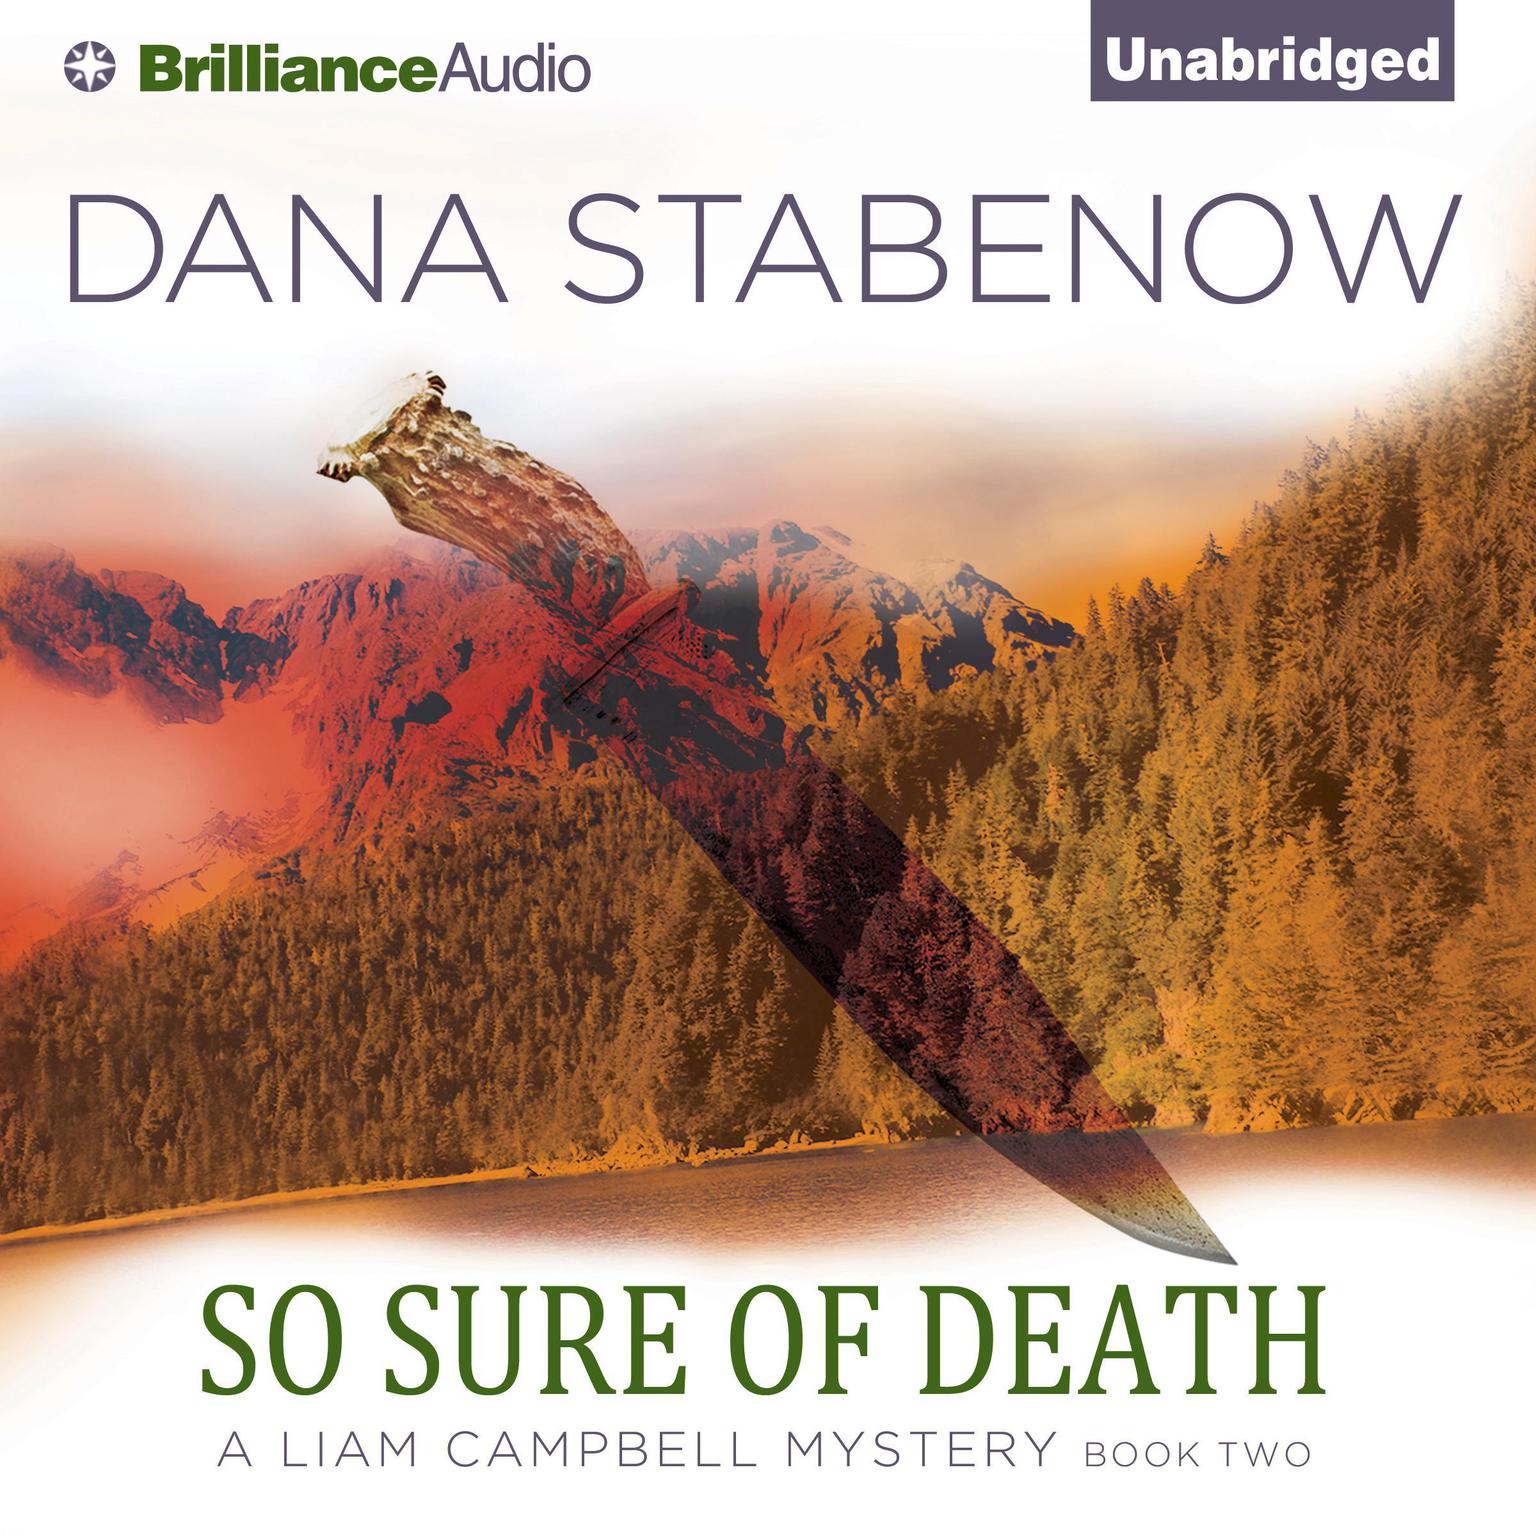 So Sure of Death: A Liam Campbell Mystery Audiobook, by Dana Stabenow